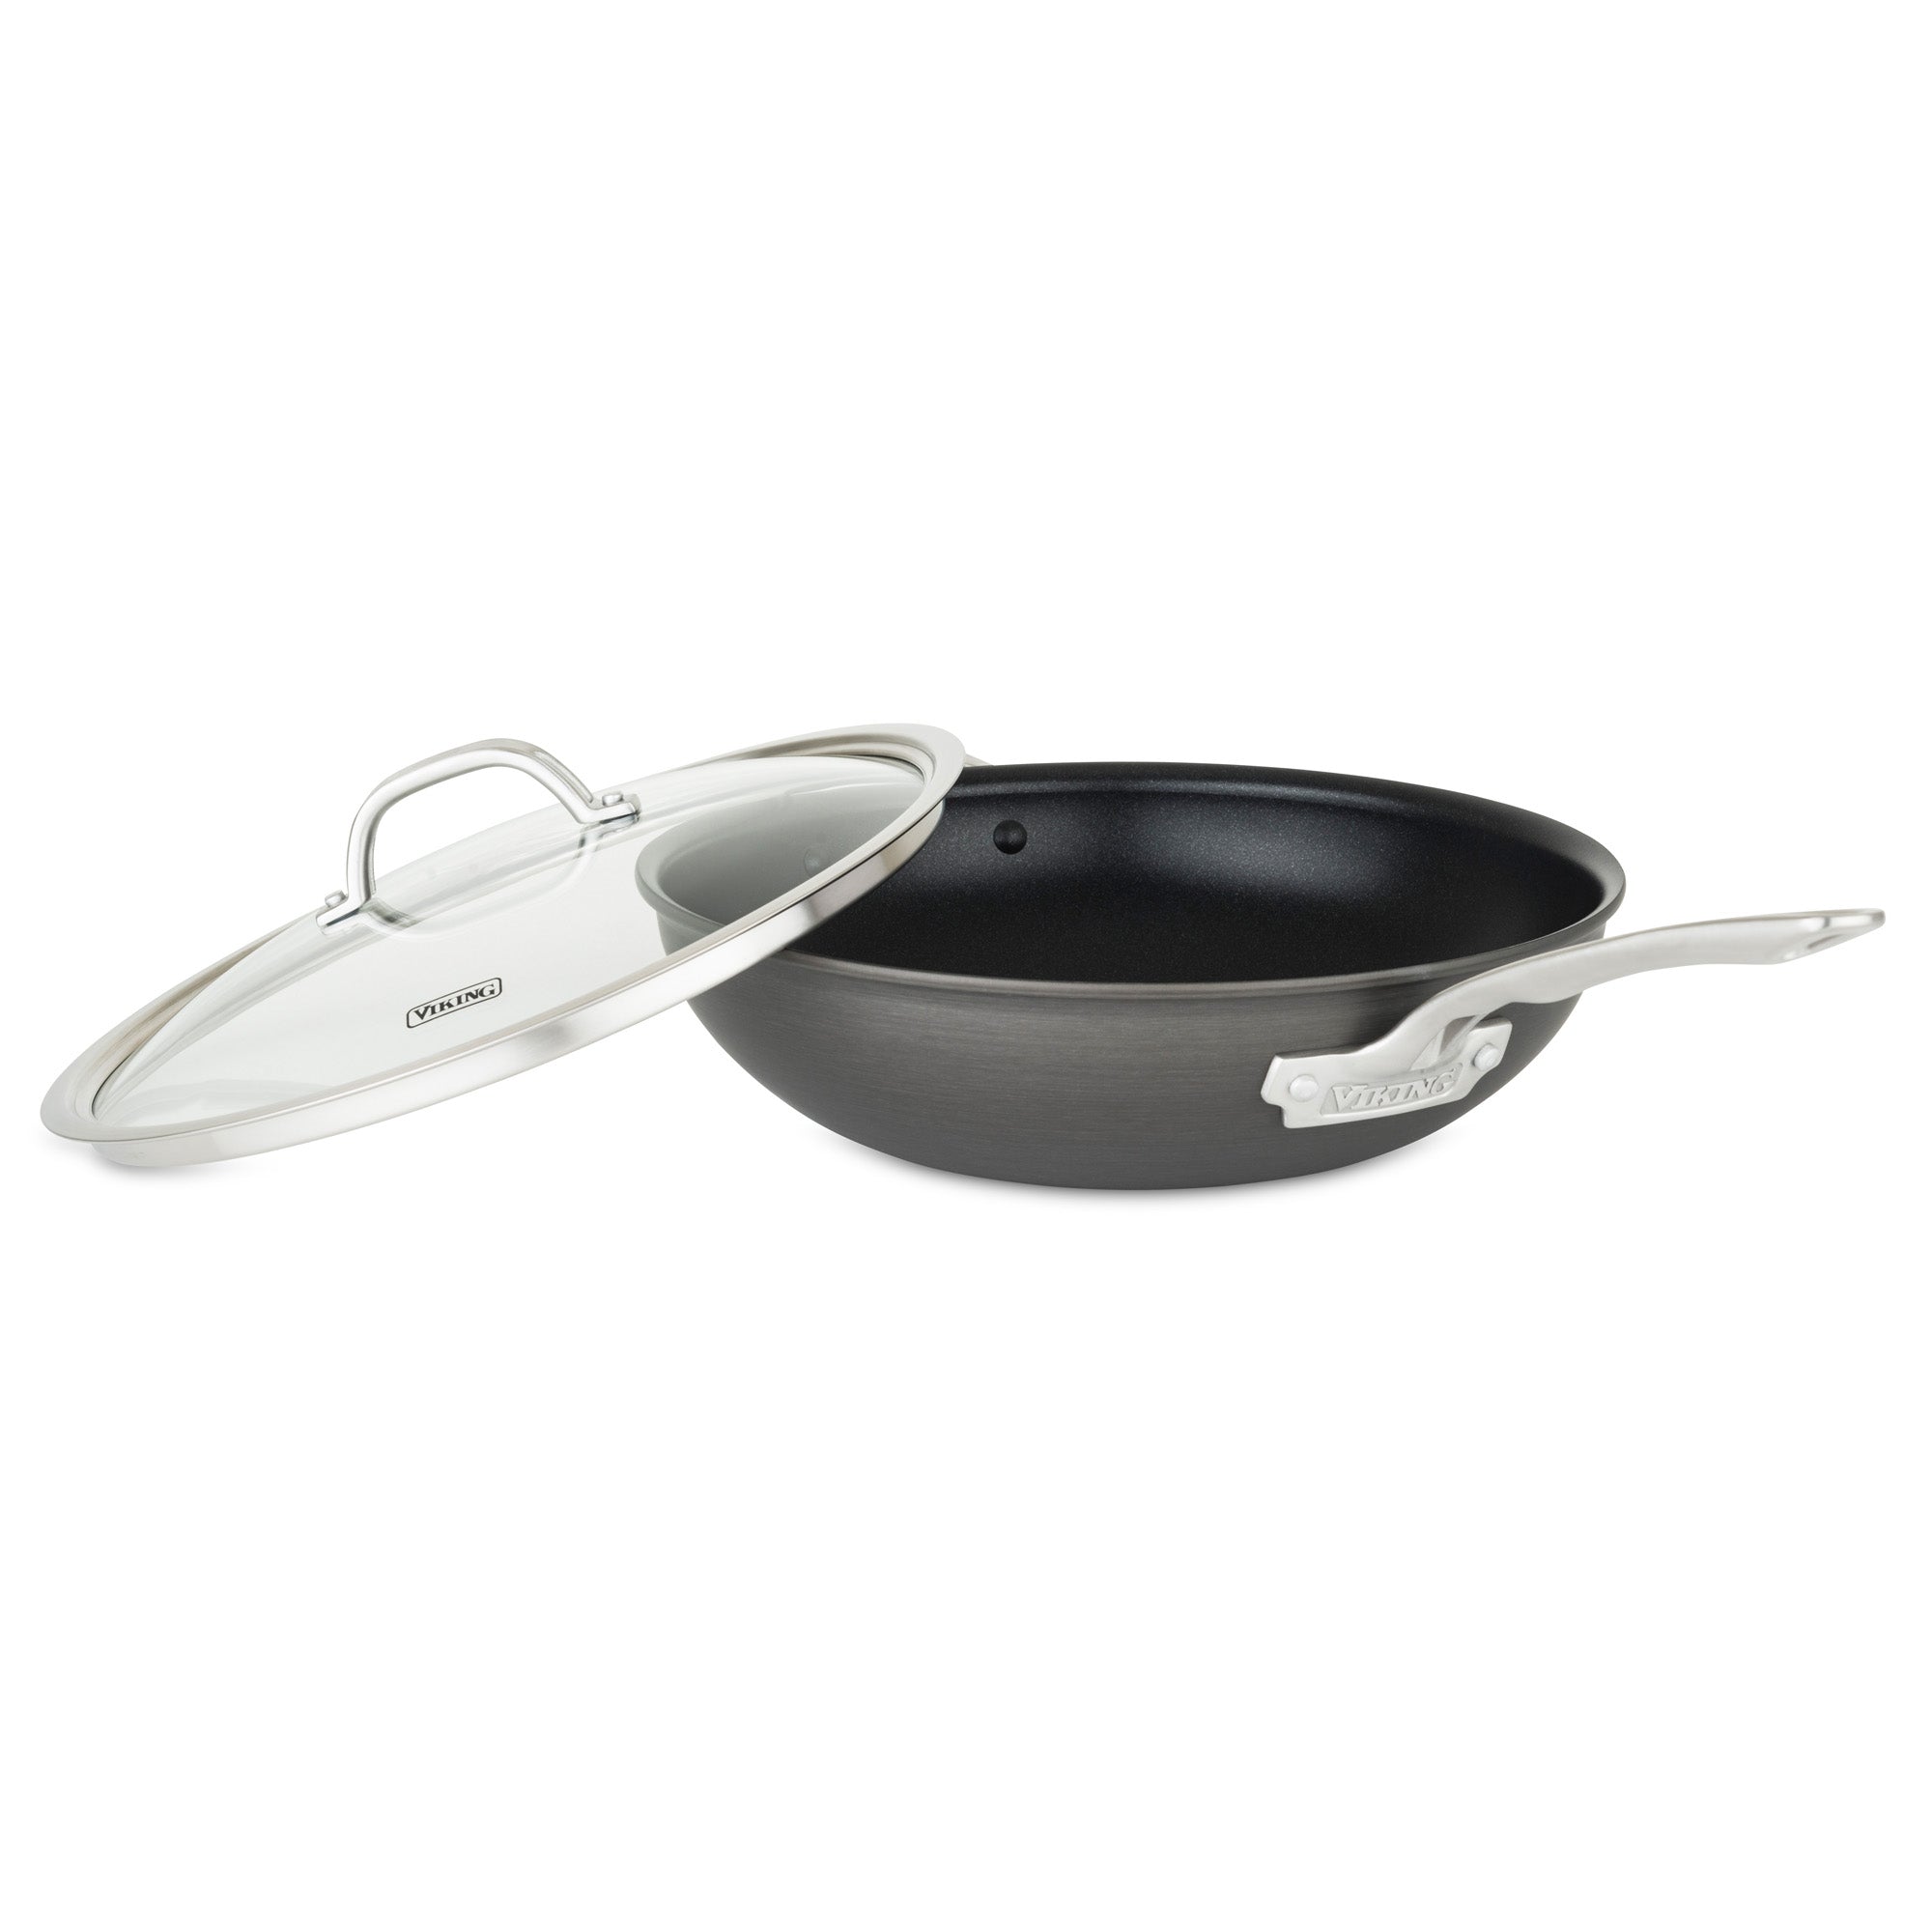 12-Inch Non-Stick Frying Pan with Lid | Granite Coating Nonstick Skillet